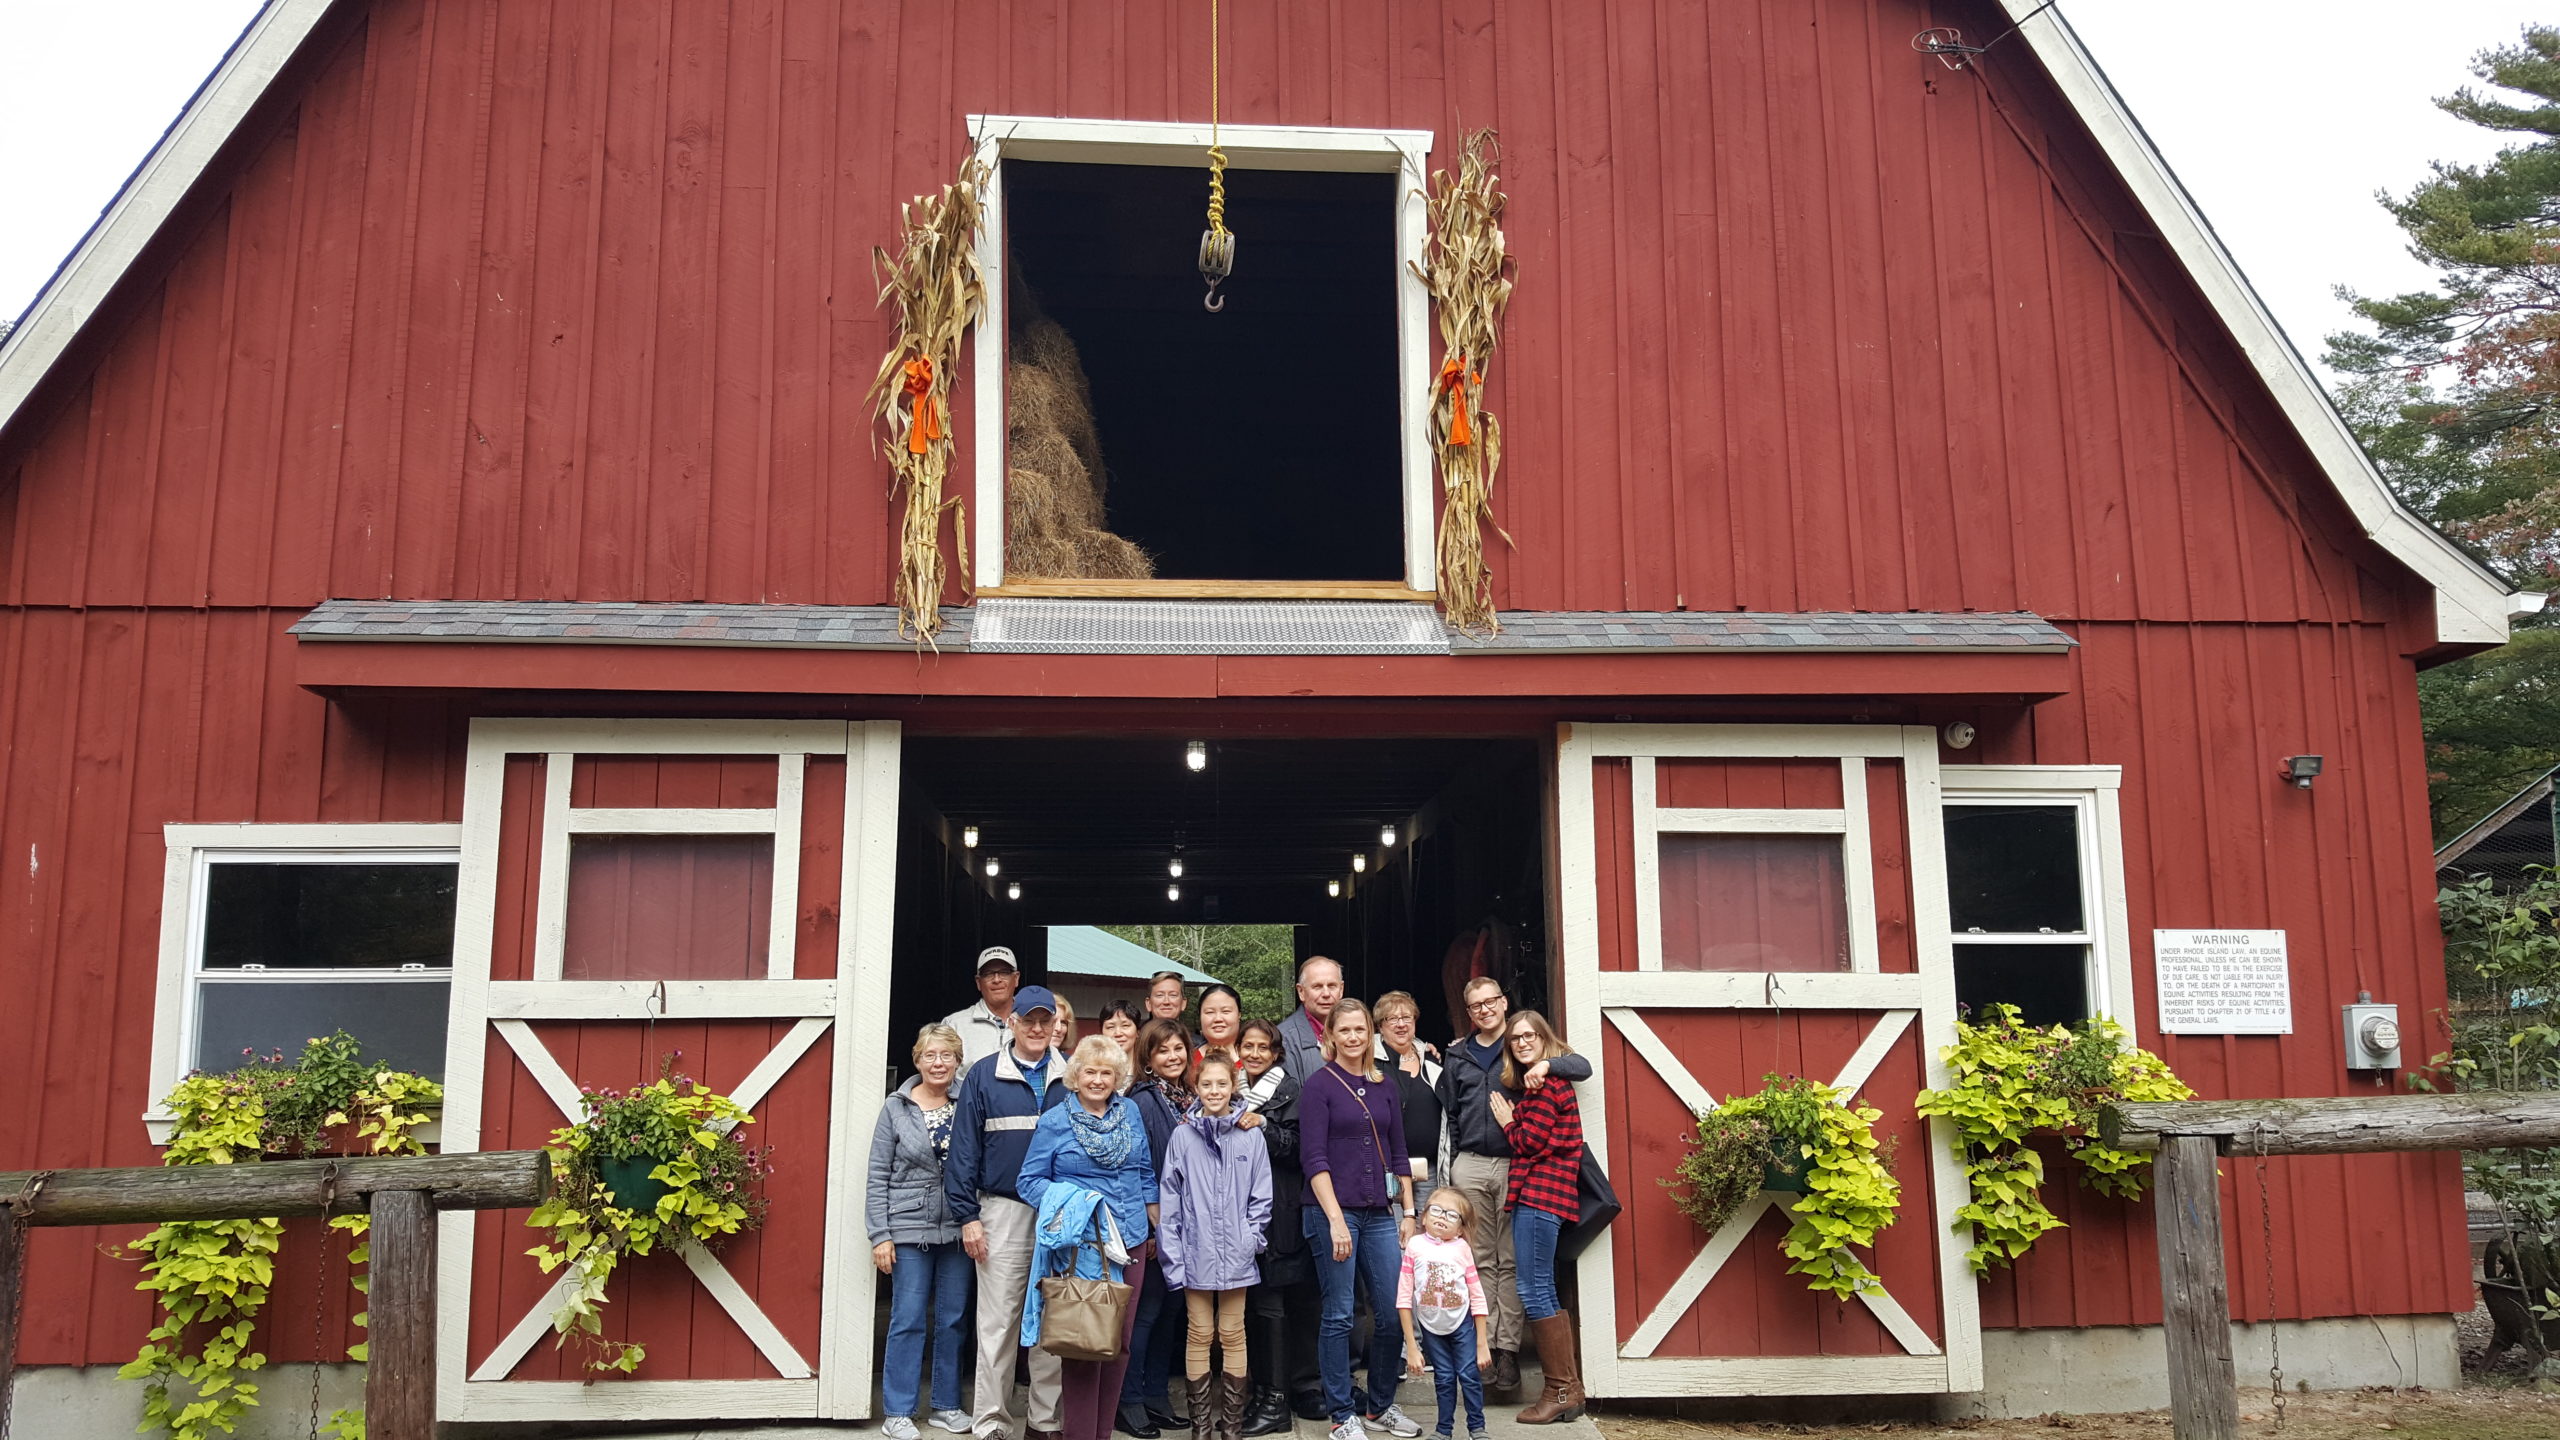 Group photo at a classic fall red barn in New England.